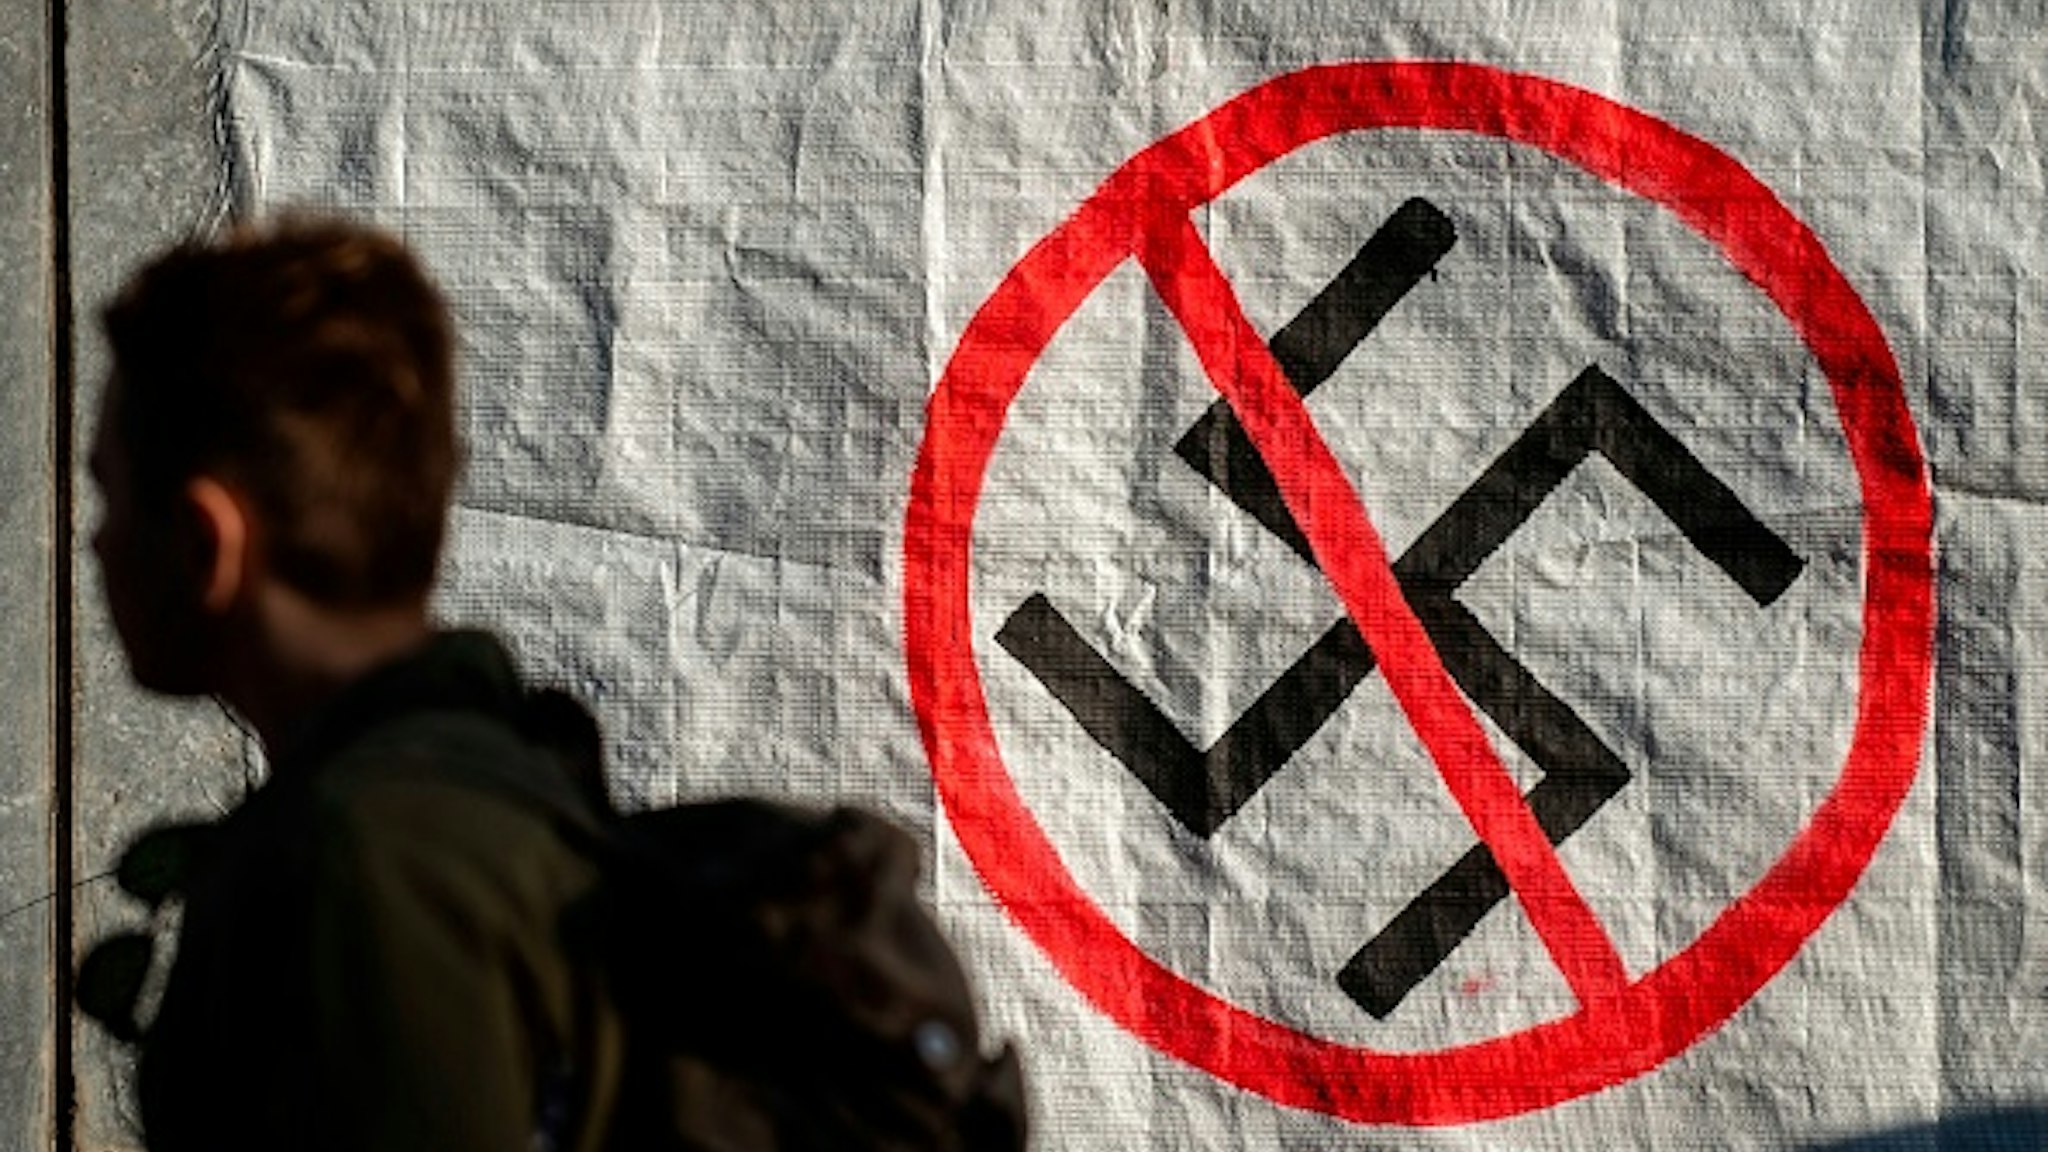 A man walks next to a logo of Nazi swastika during an anti-fascist rally outside the Court of Appeal during the testify of former MP and leader of Golden Dawn party Nikolaos Michaloliakos, on November 6, 2019, in Athens. - The 61-year-old Holocaust denier is one of nearly 70 defendants facing sentences of five to 20 years in prison. The main charge against them is participation in a criminal organisation, in addition to a host of other indictments related to murder and assault.